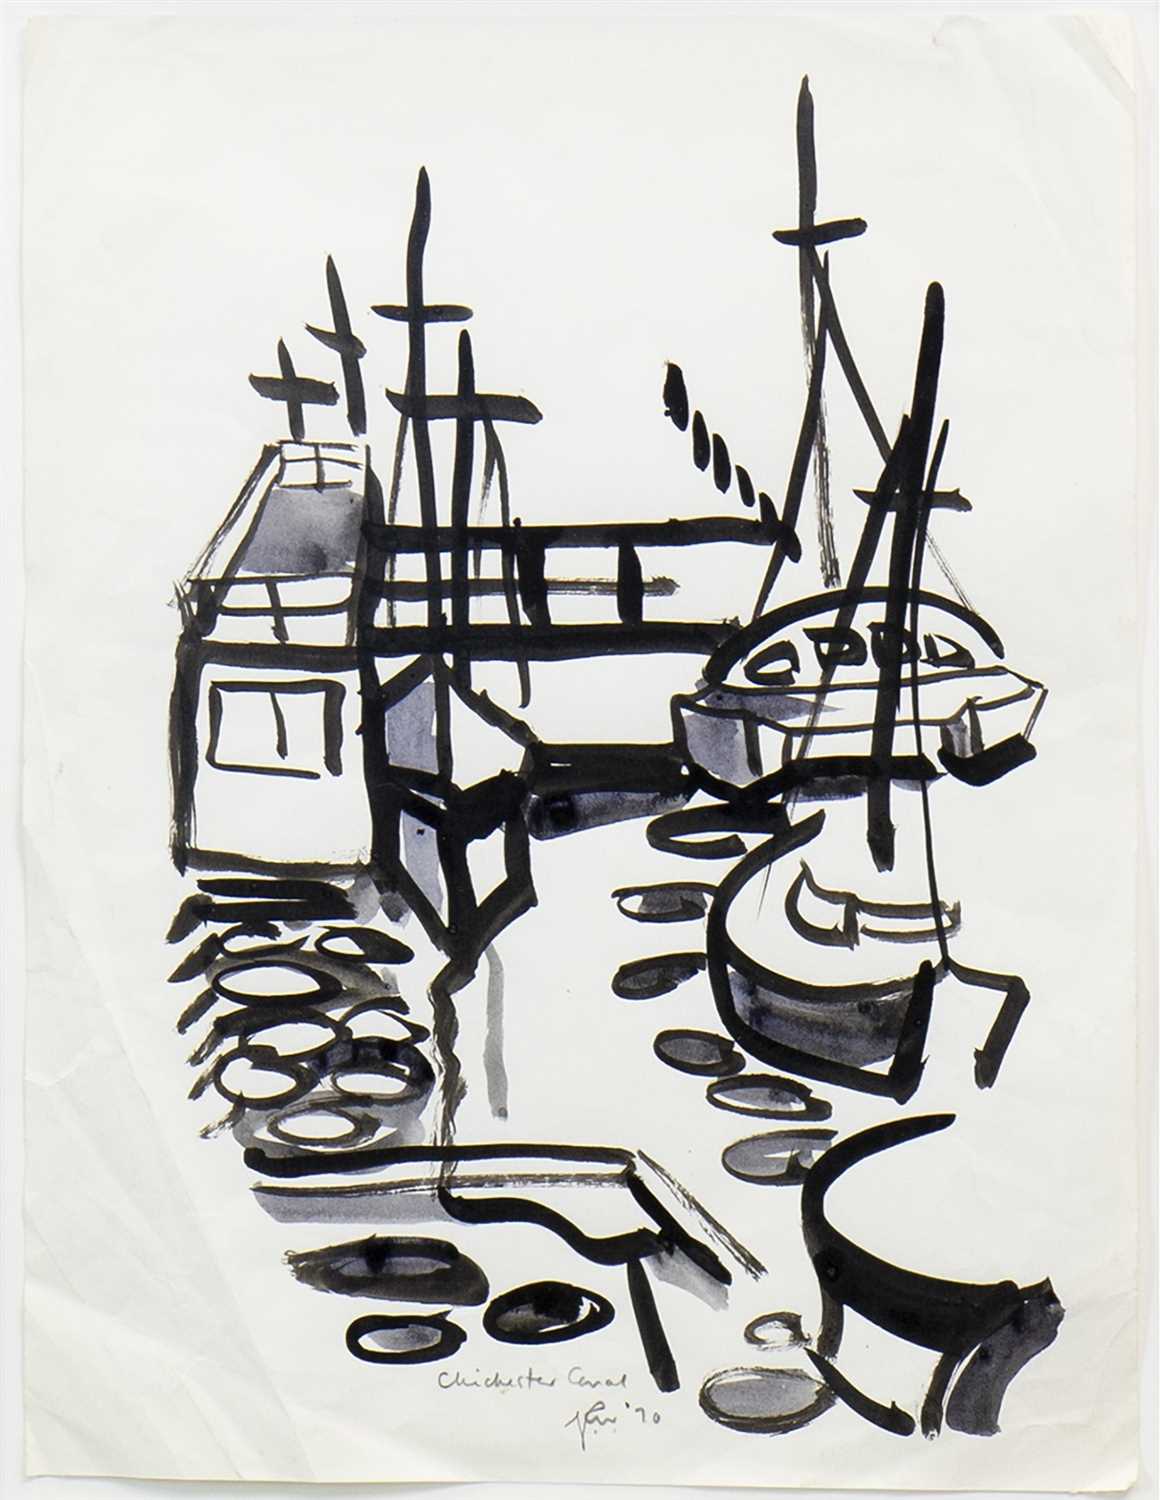 Lot 523 - CHICHESTER CANAL, AN INK AND WASH BY GEORGE WYLLIE